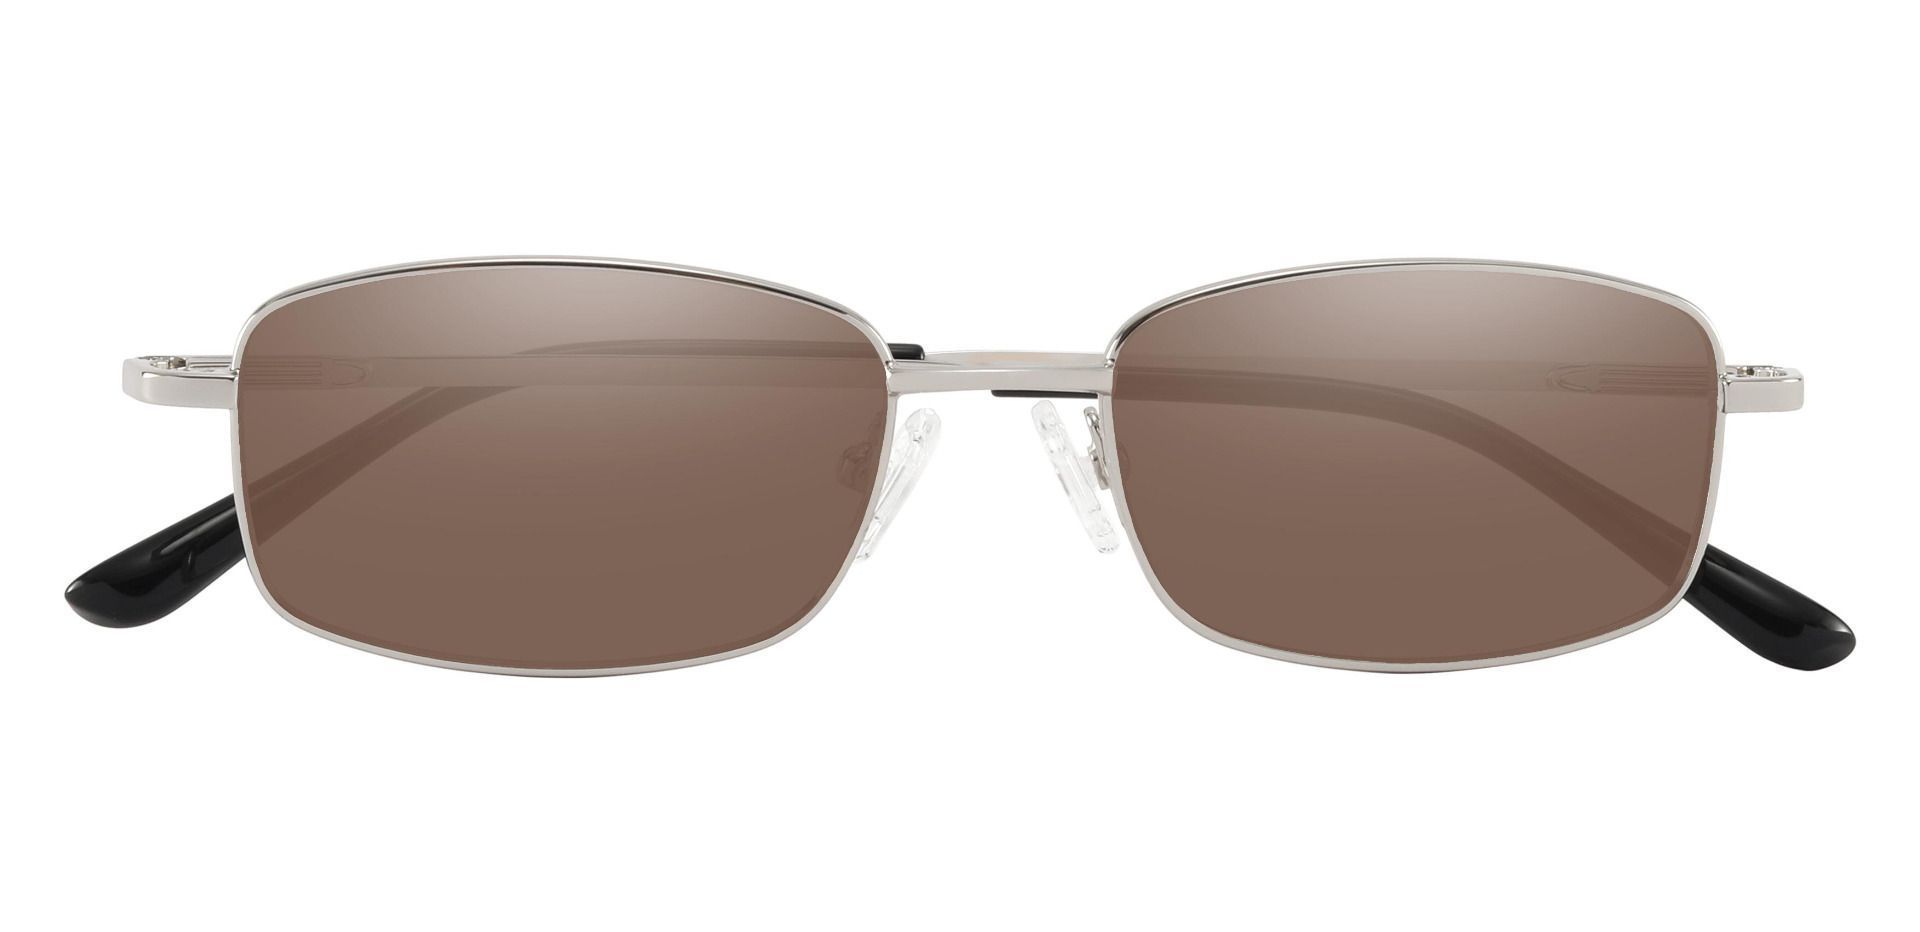 Hellman Rectangle Non-Rx Sunglasses - Silver Frame With Brown Lenses